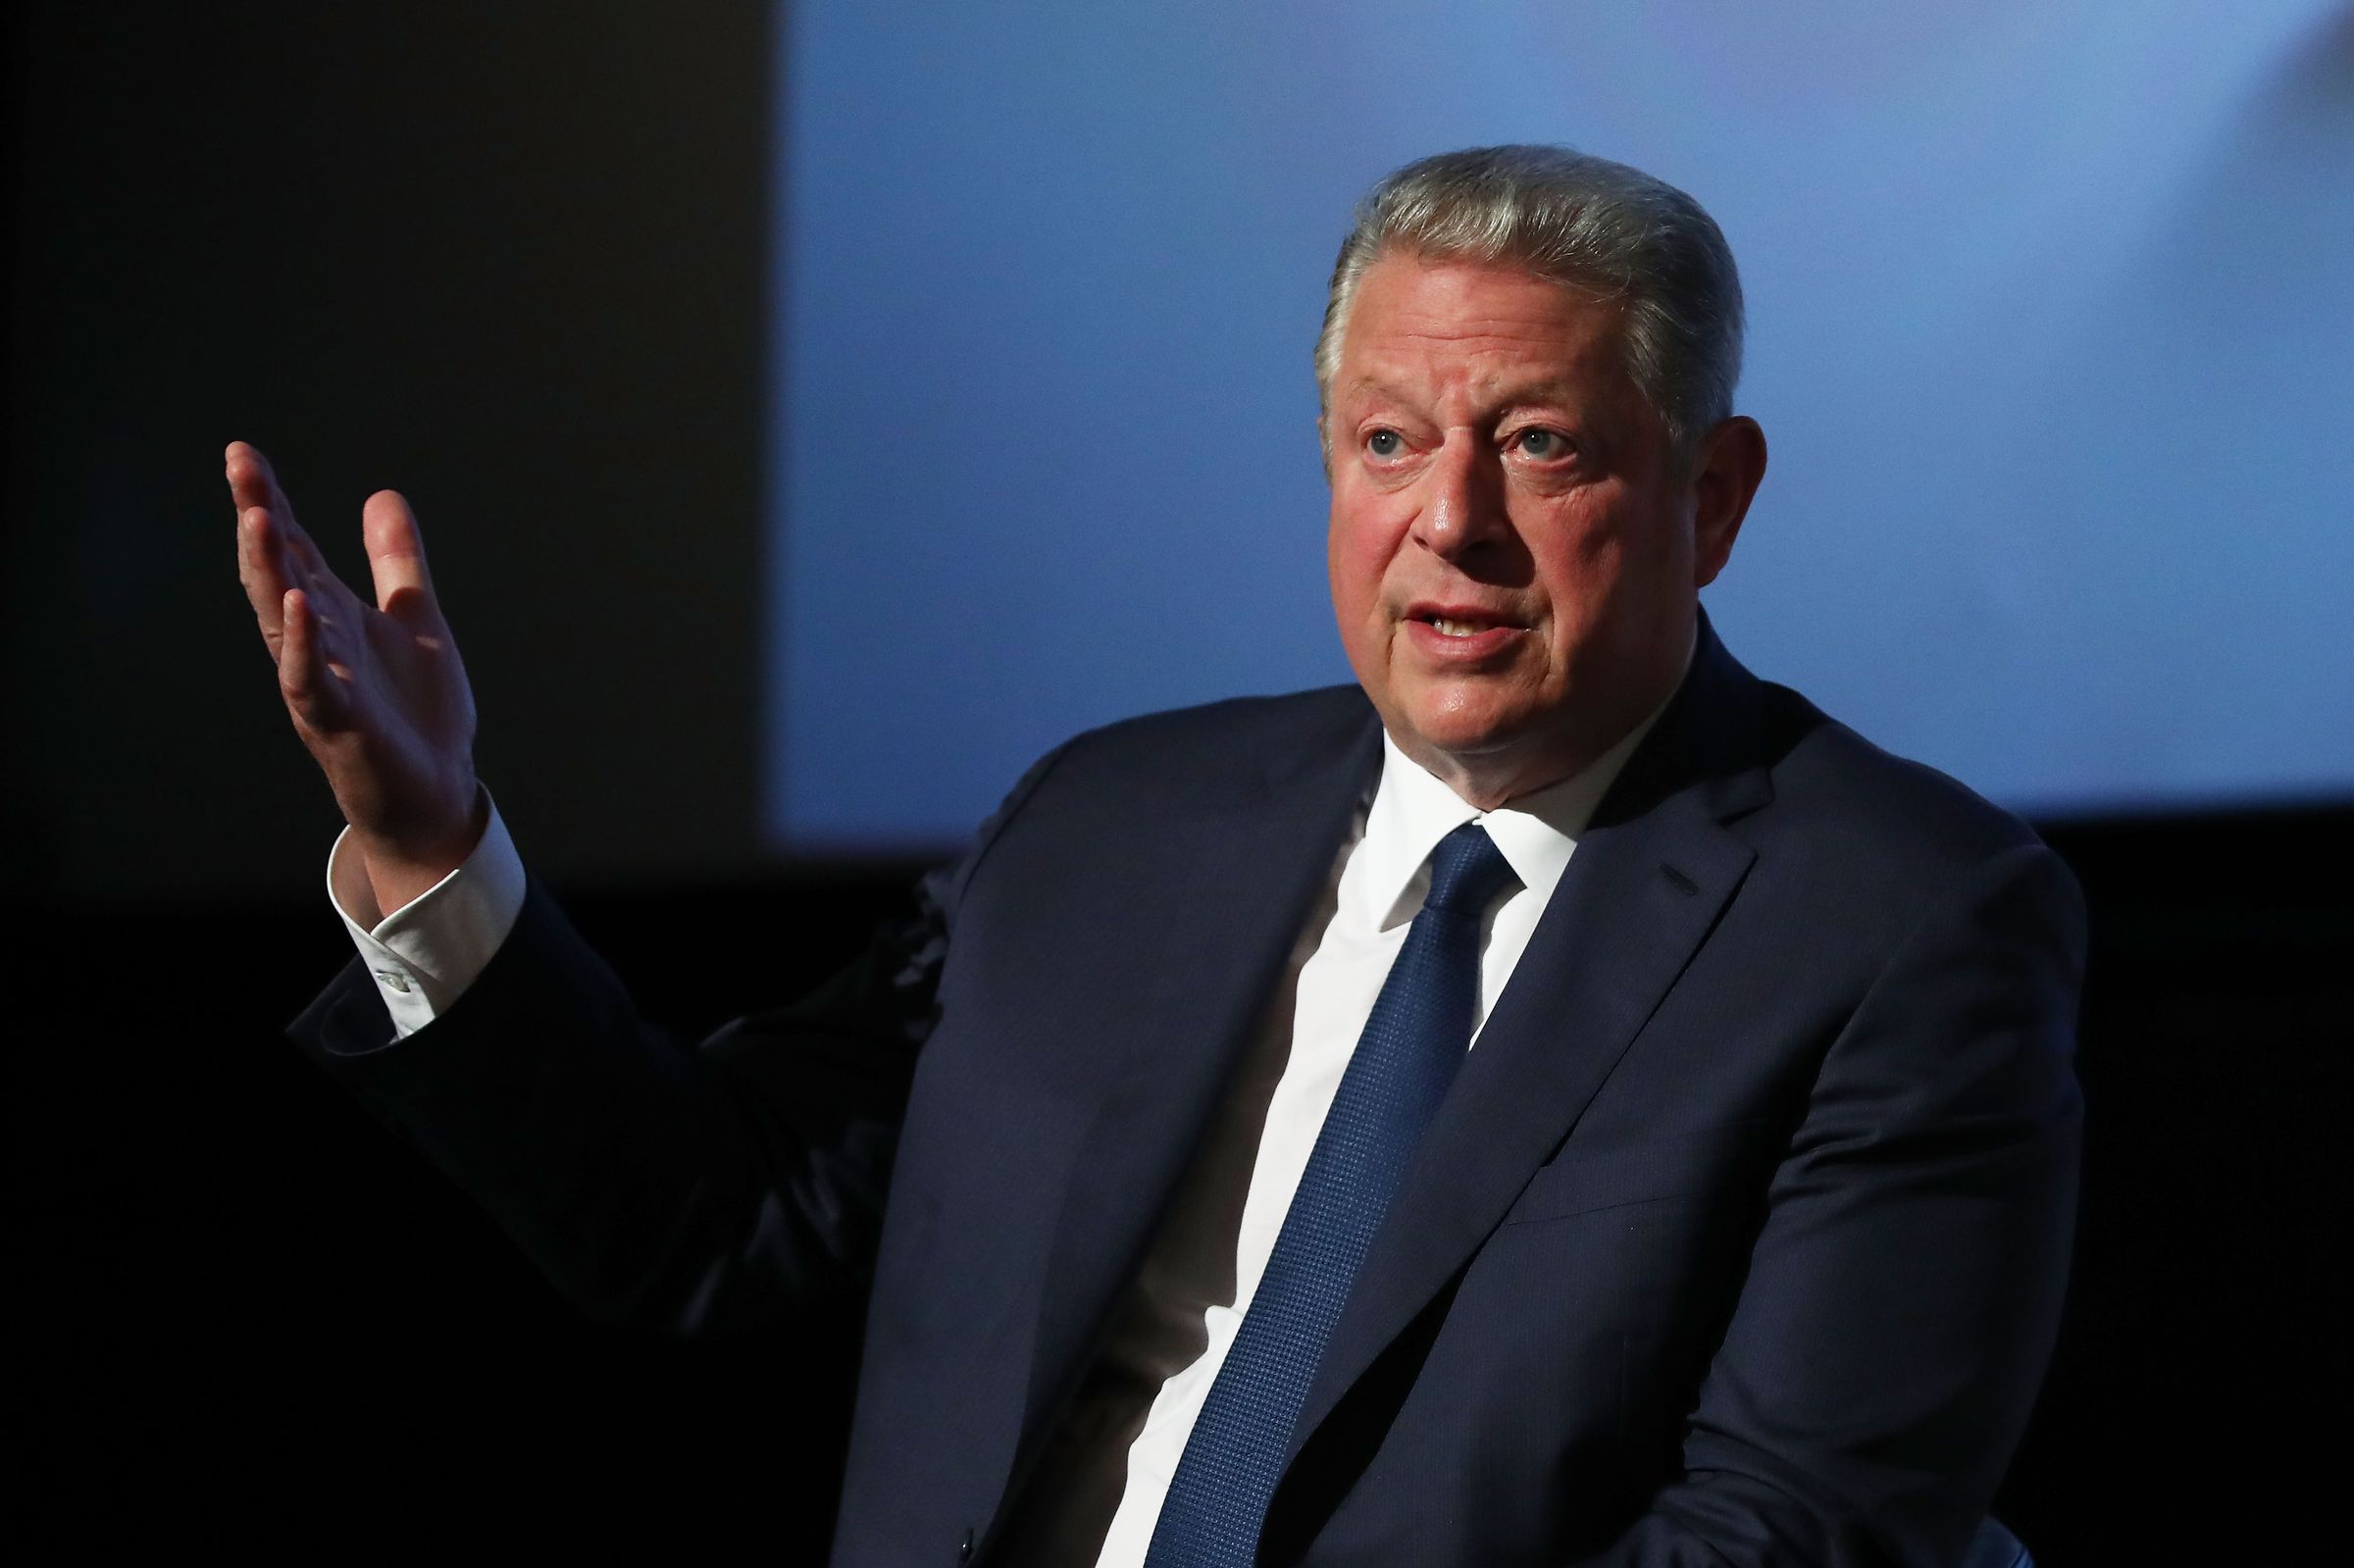 Special Screening of “An Inconvenient Sequel: Truth to Power” In Sydney With Former U.S. Vice President Al Gore